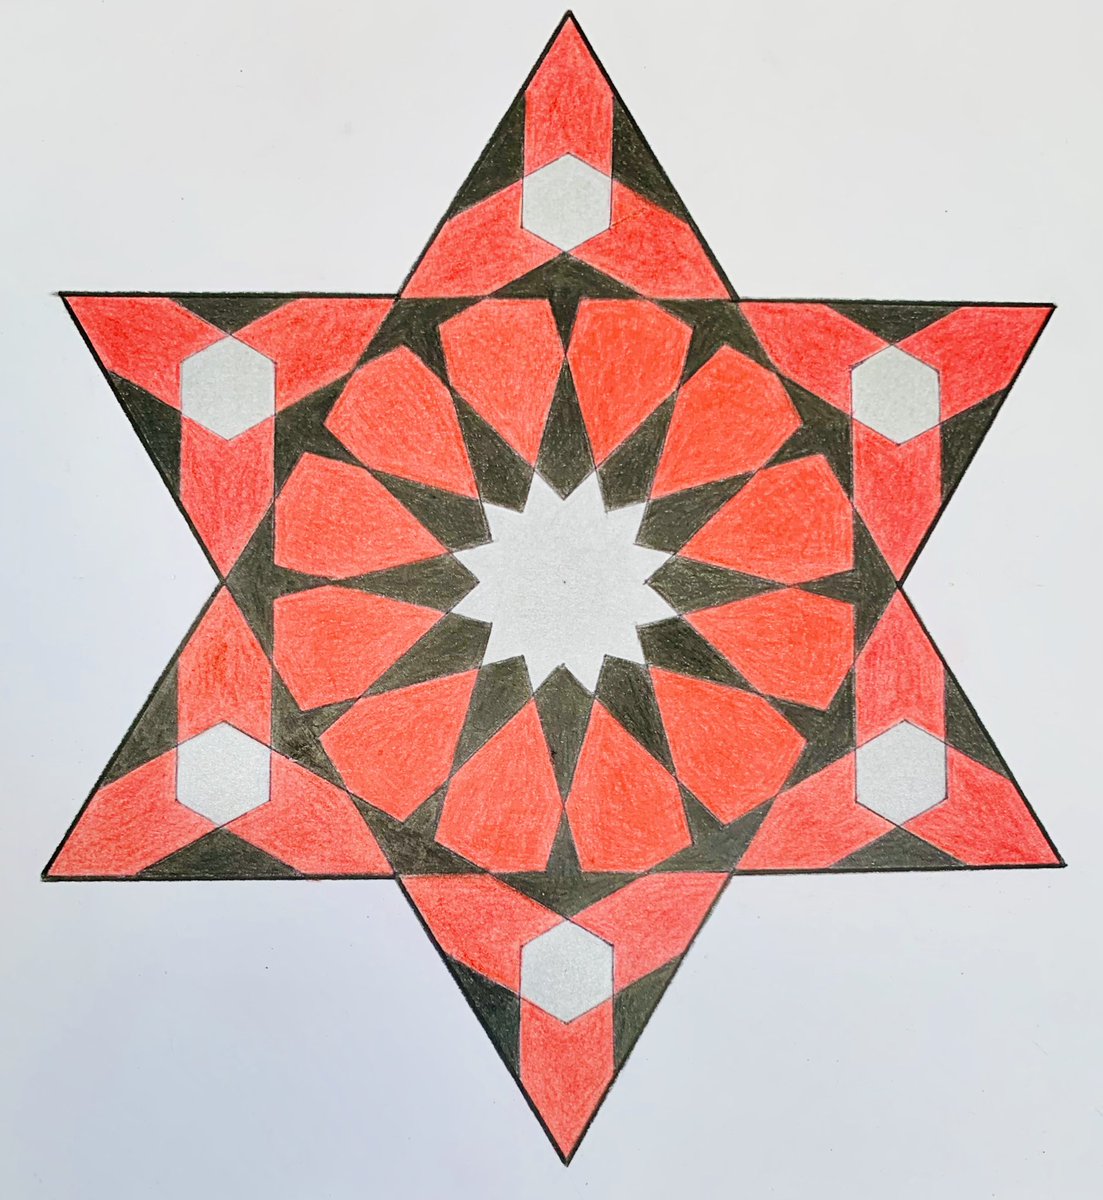 A stellated  #twelvefoldchallenge from  @samira_mian for Day 8 of  #GeometricJuly.  @c0mplexnumber